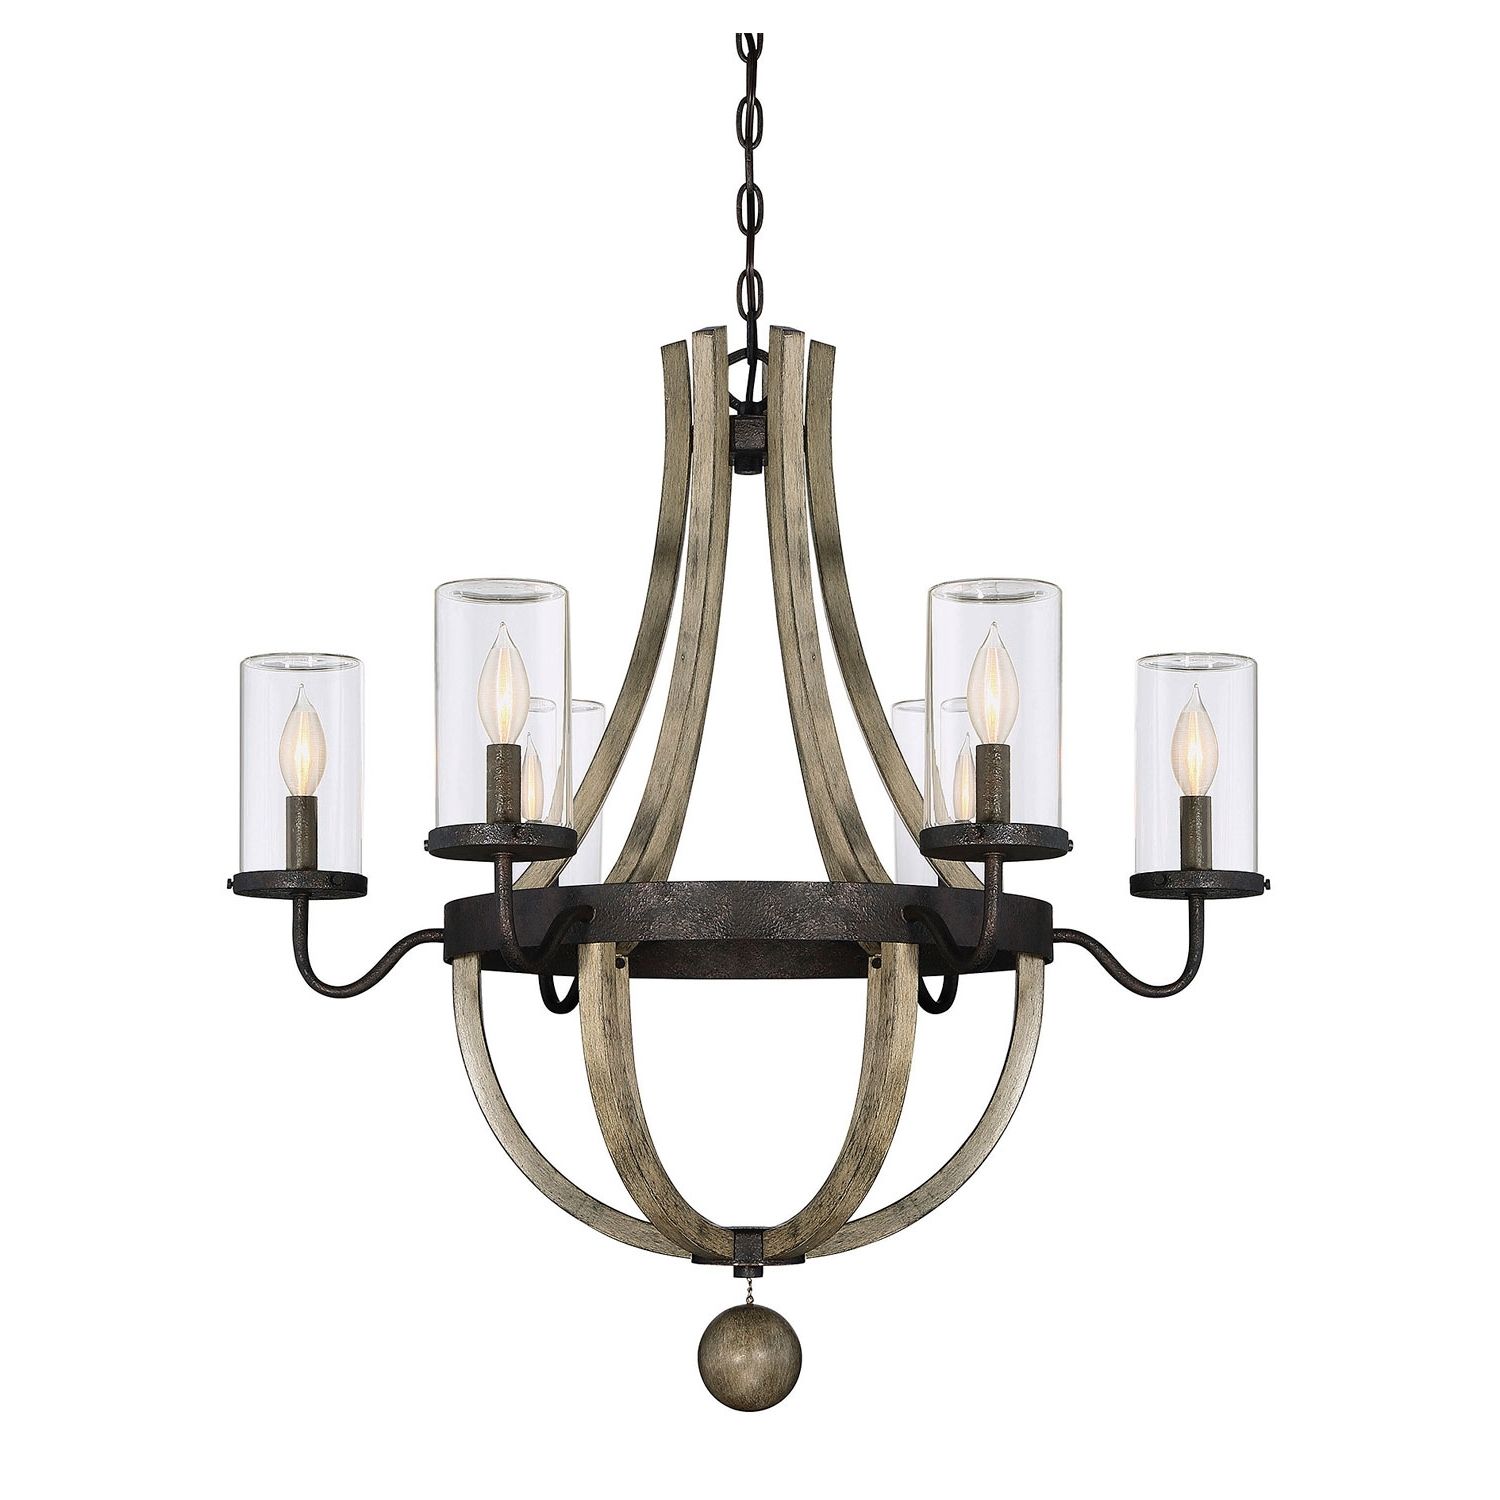 Best And Newest Hanging Candelabra Chandeliers For Chandeliers Design : Fabulous Hanging Candle Chandelier Candlestick (View 1 of 20)